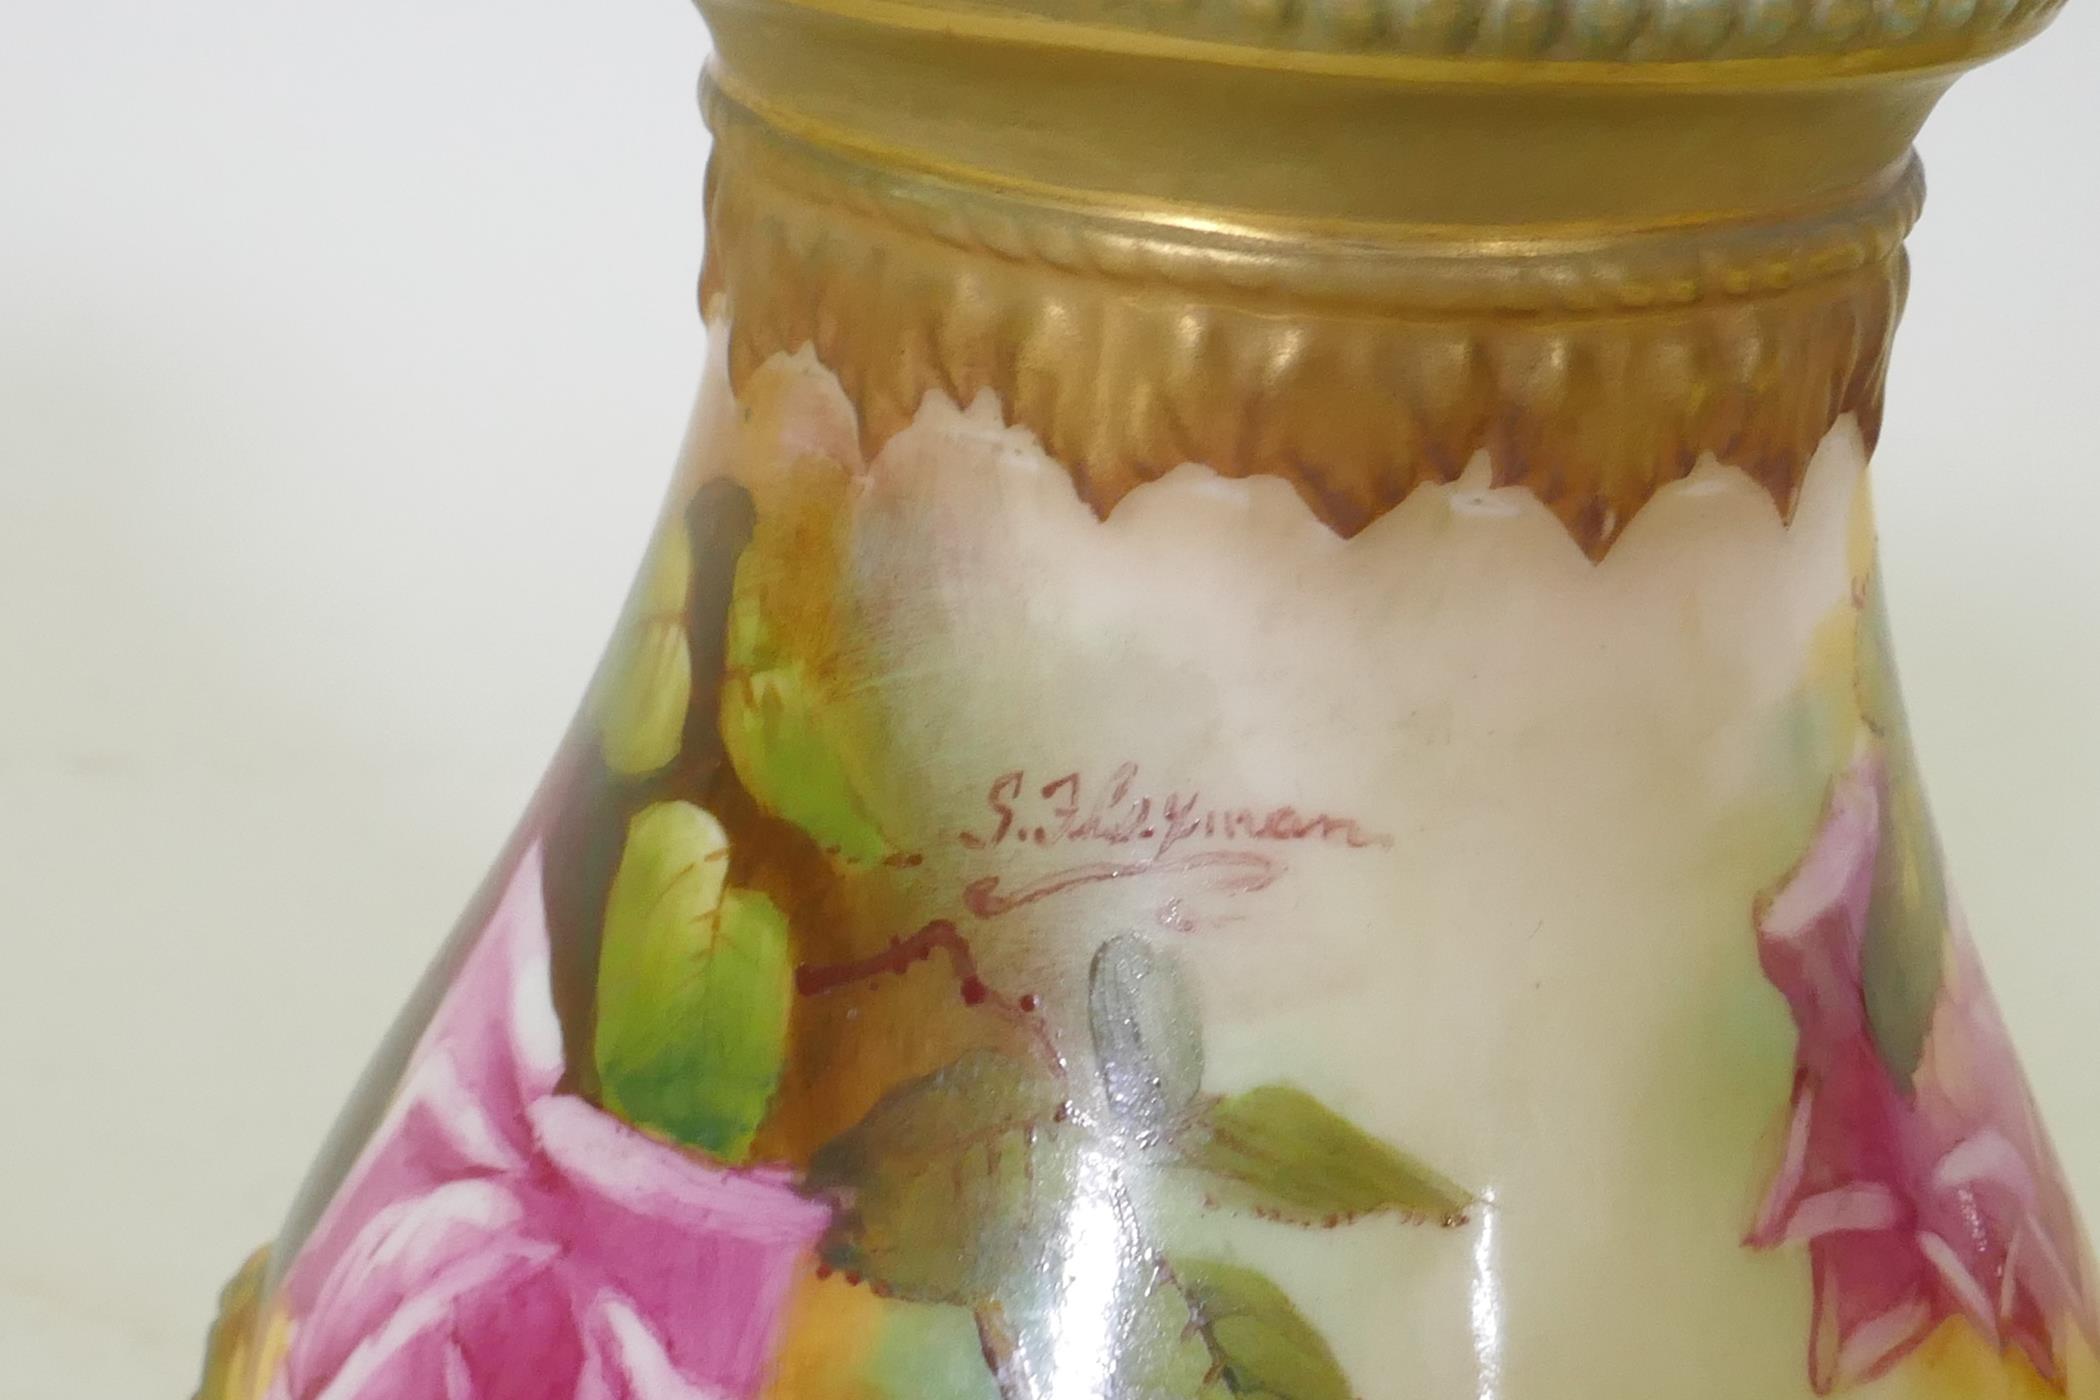 A Royal Crown Derby porcelain vase with gilt highlights on a green ground and hand painted - Image 7 of 9